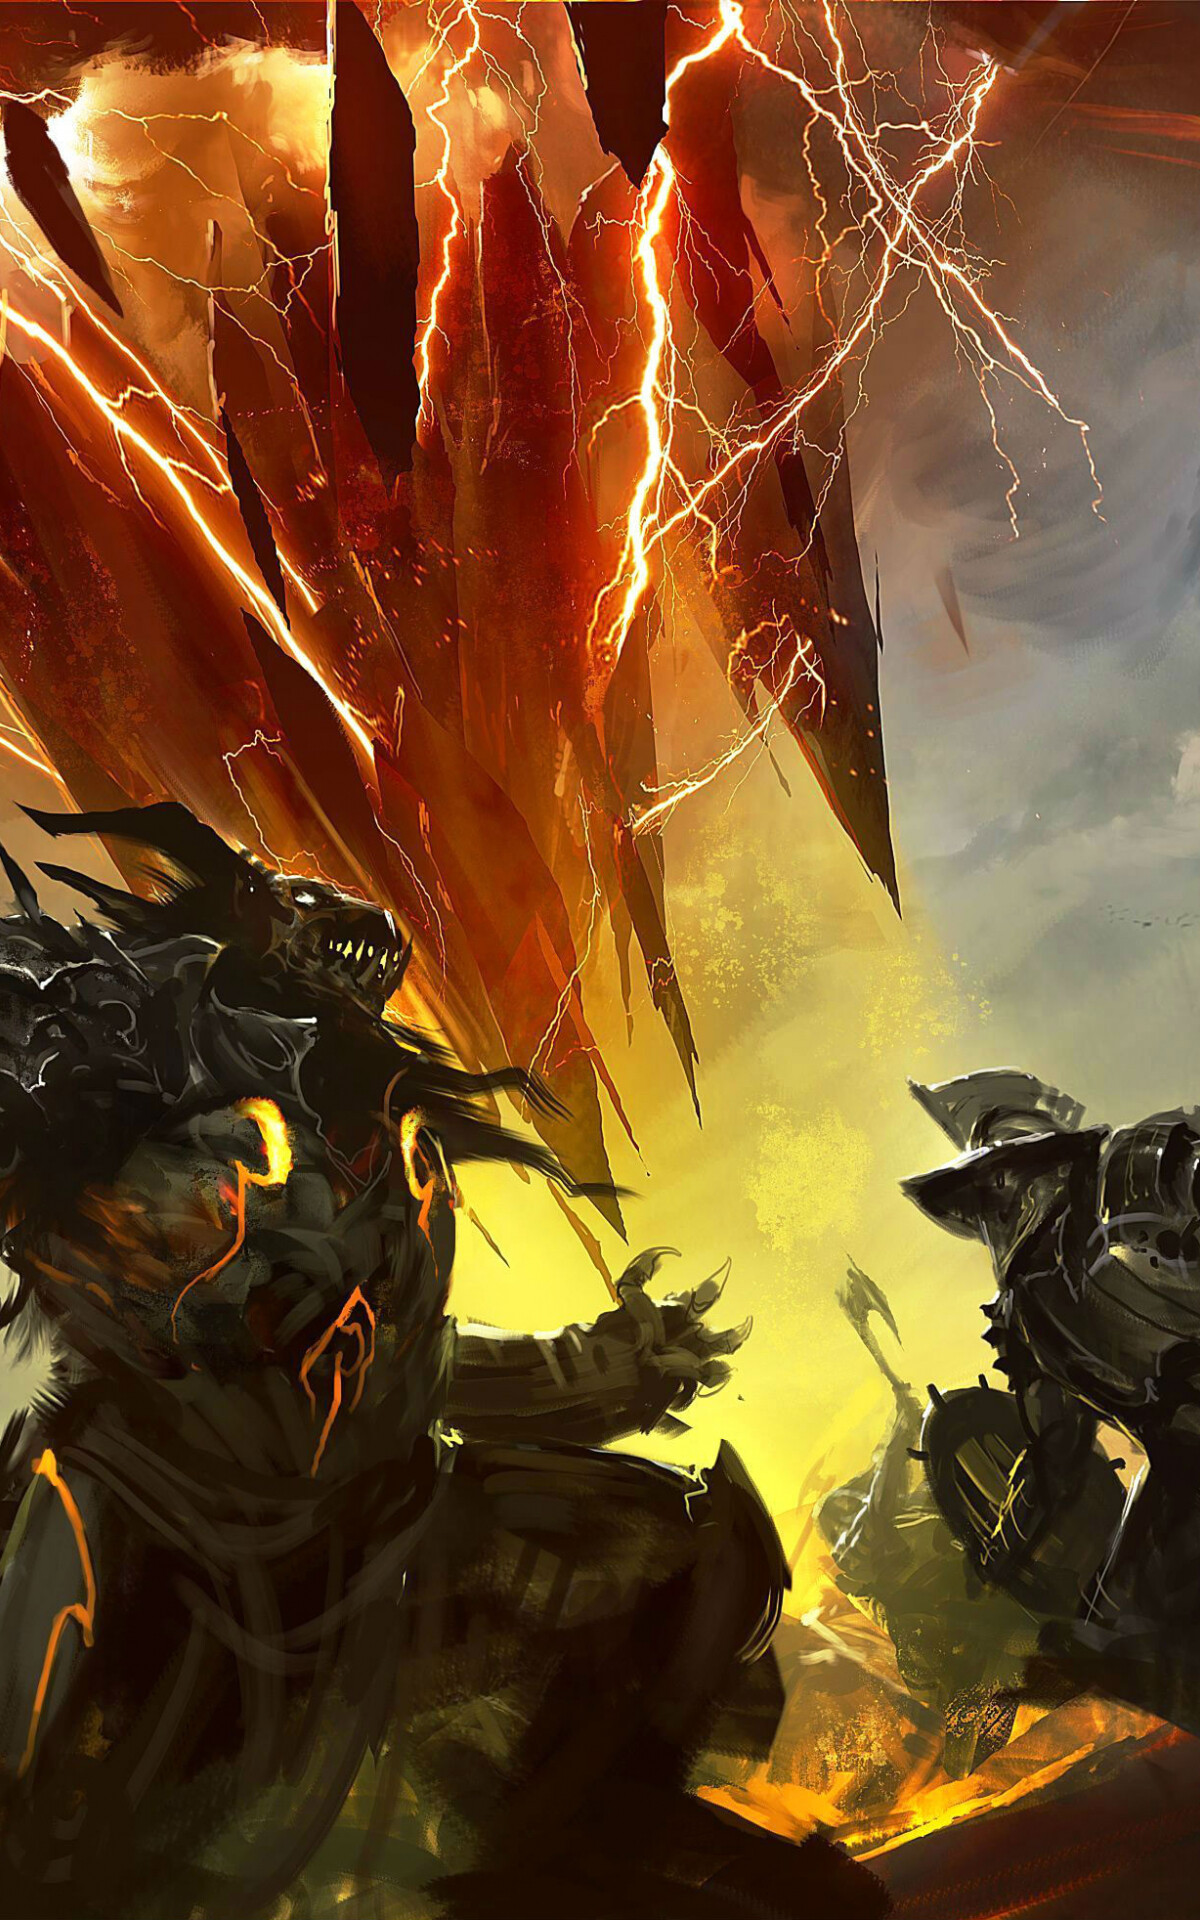 Guild Wars: The game takes place in Tyria world filled with magic, monsters, and dragons. 1200x1920 HD Wallpaper.